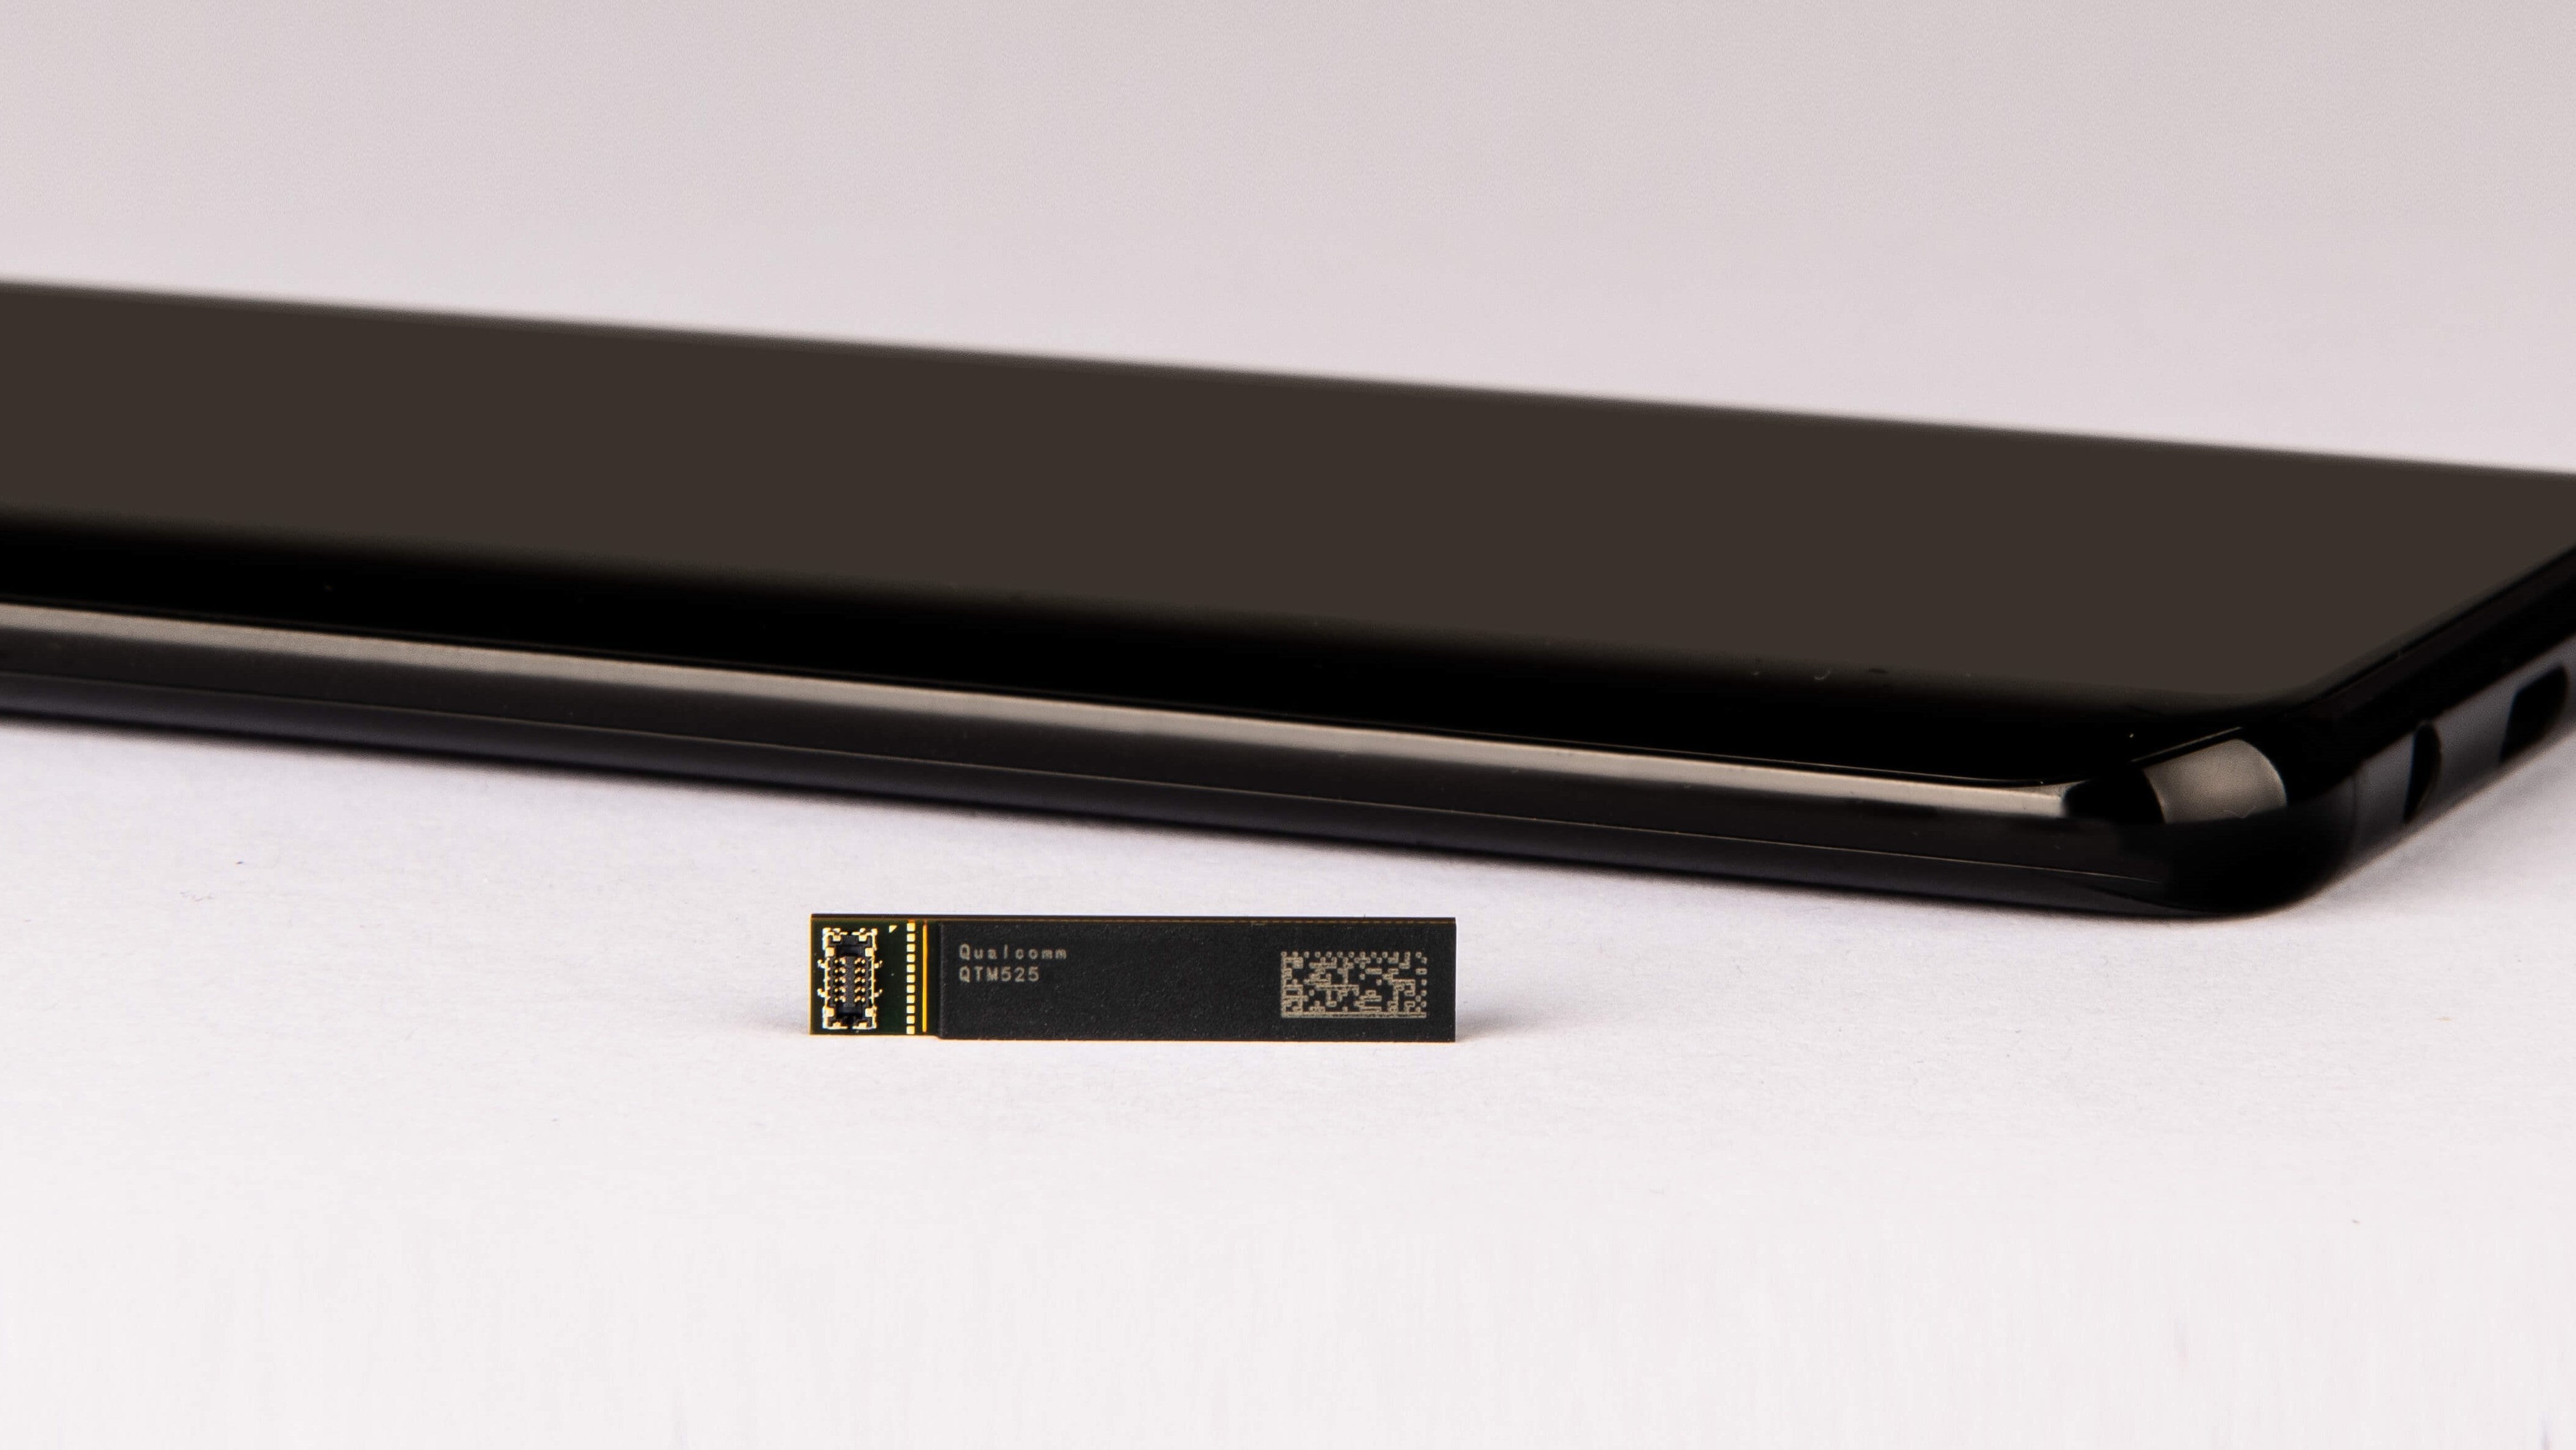 The new QTM525 antenna module is seriously small - Qualcomm reveals its second generation 5G modem, the Snapdragon X55